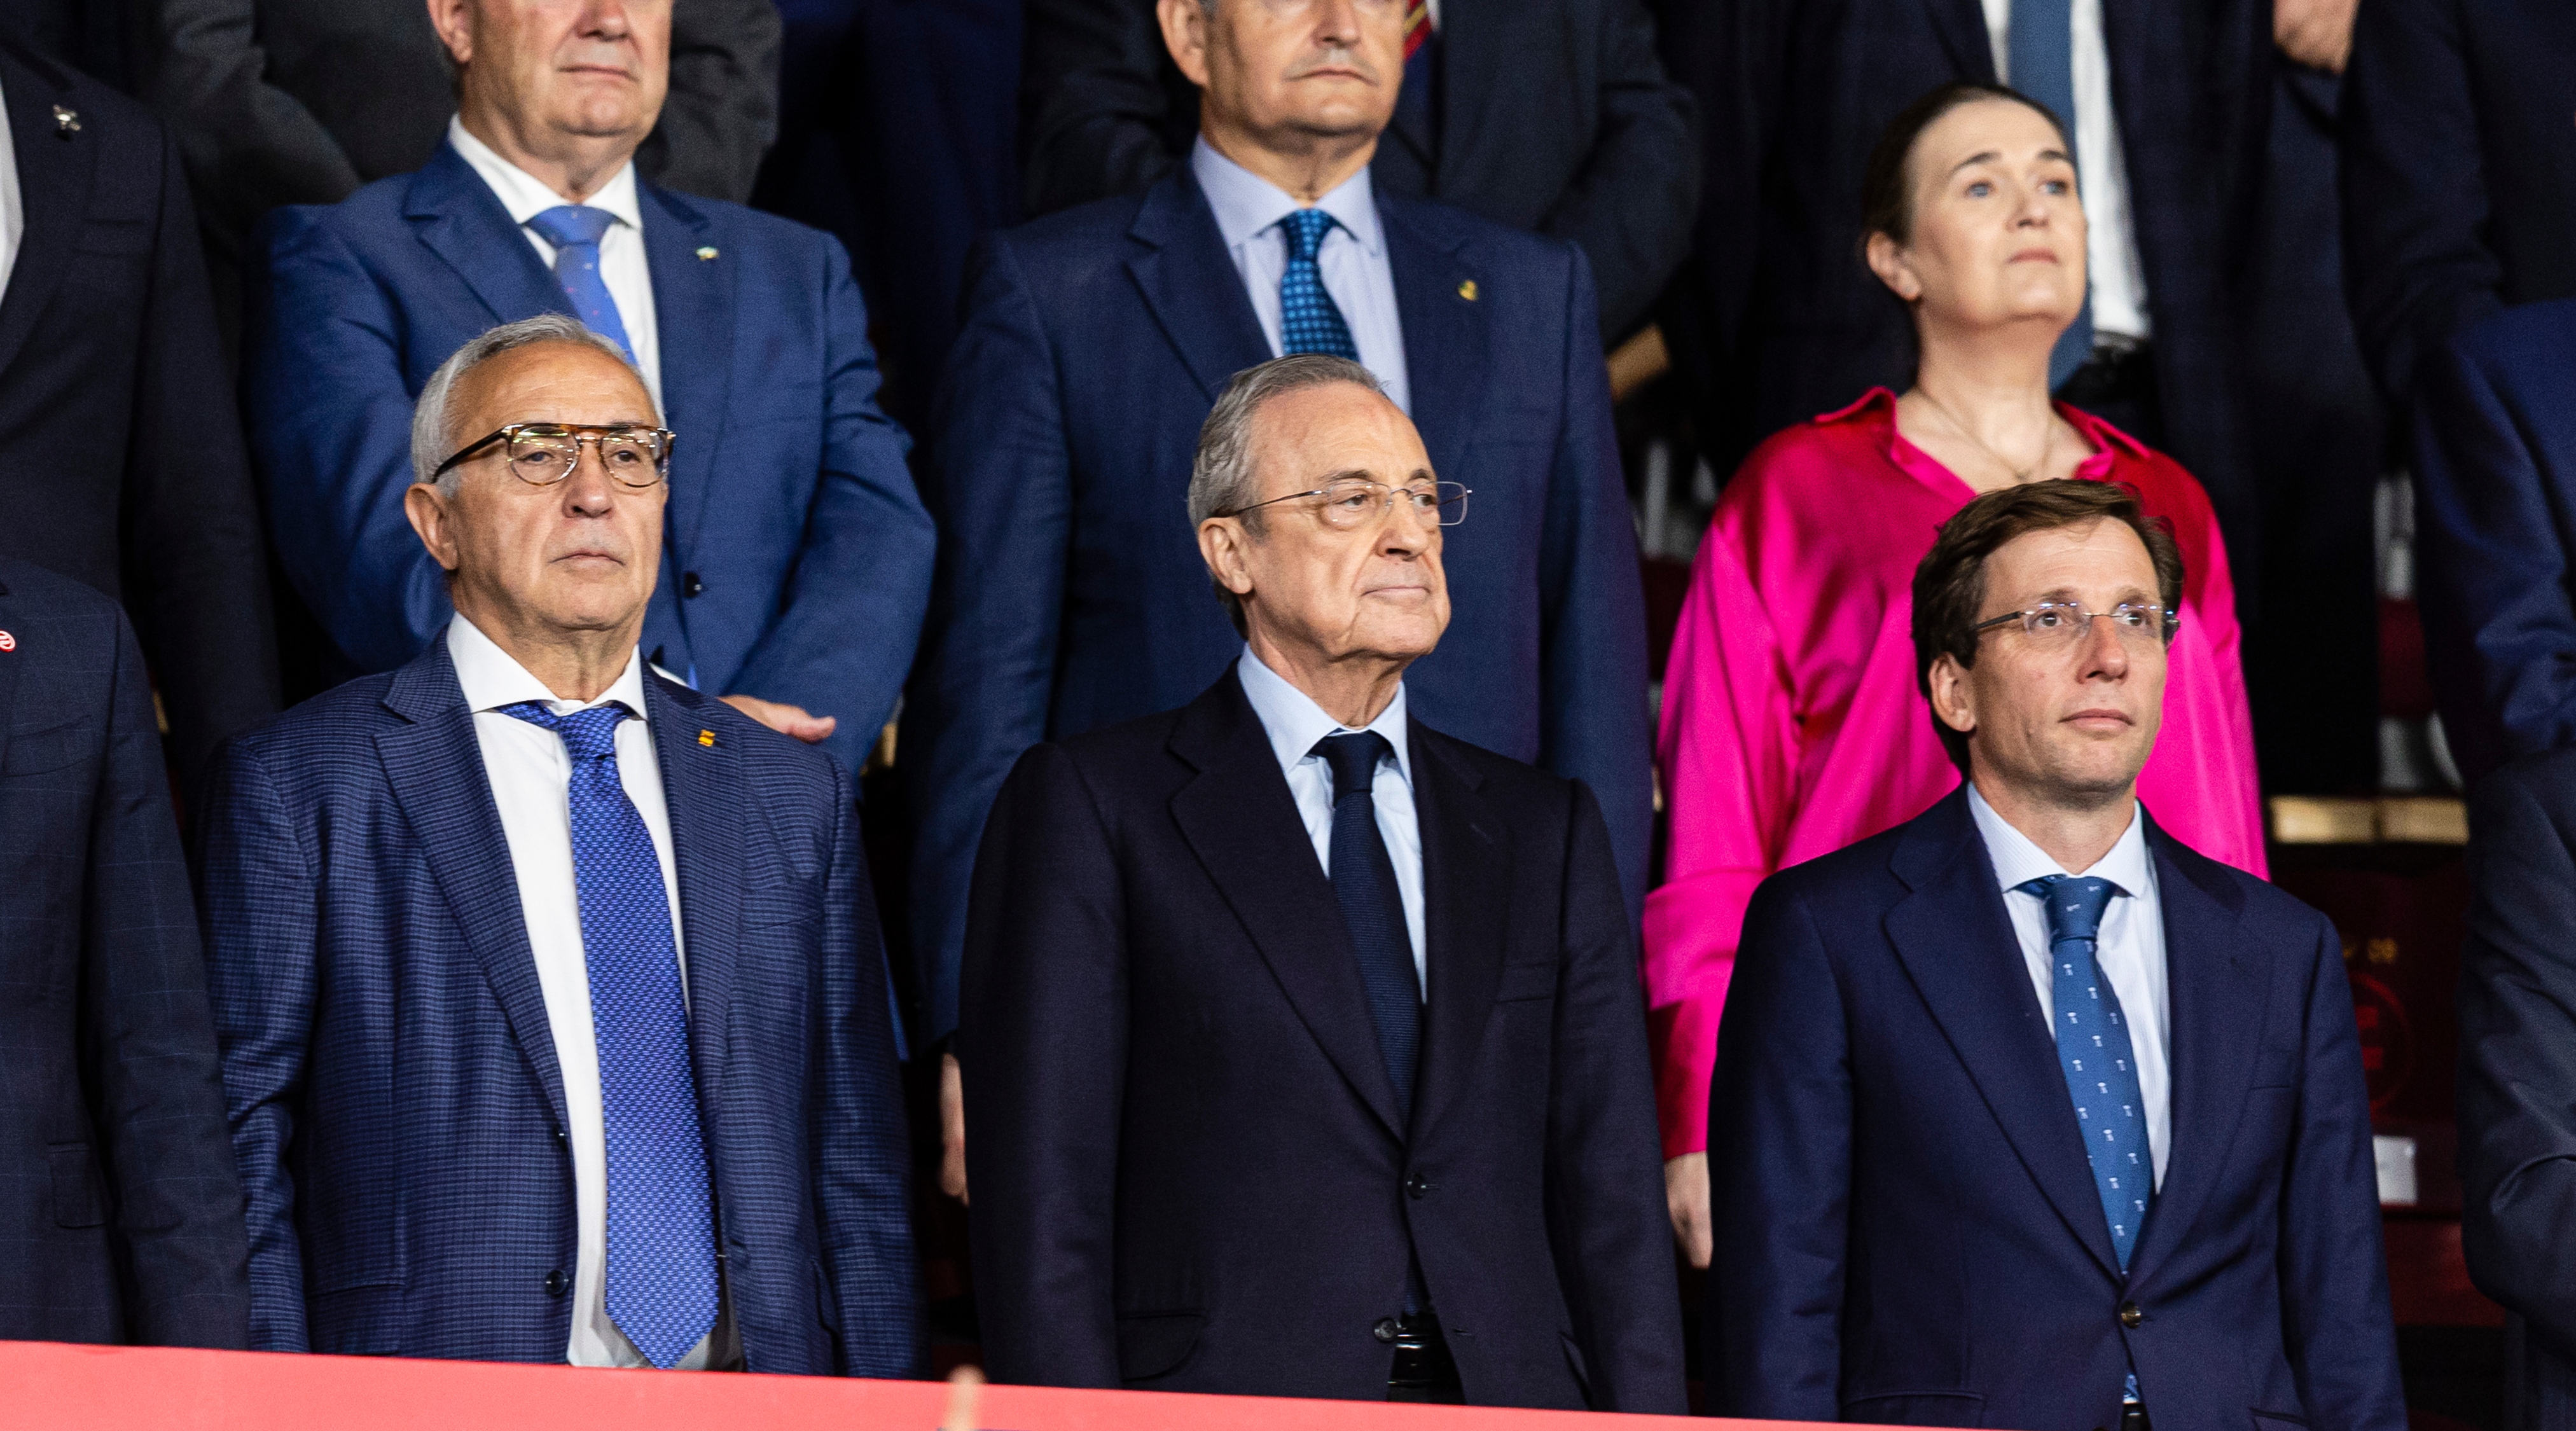 Real Madrid president Florentino Perez attends the Copa del Rey final between Real Madrid and Osasuna at the Estadio de La Cartuja on May 6, 2023 in Seville, Spain.